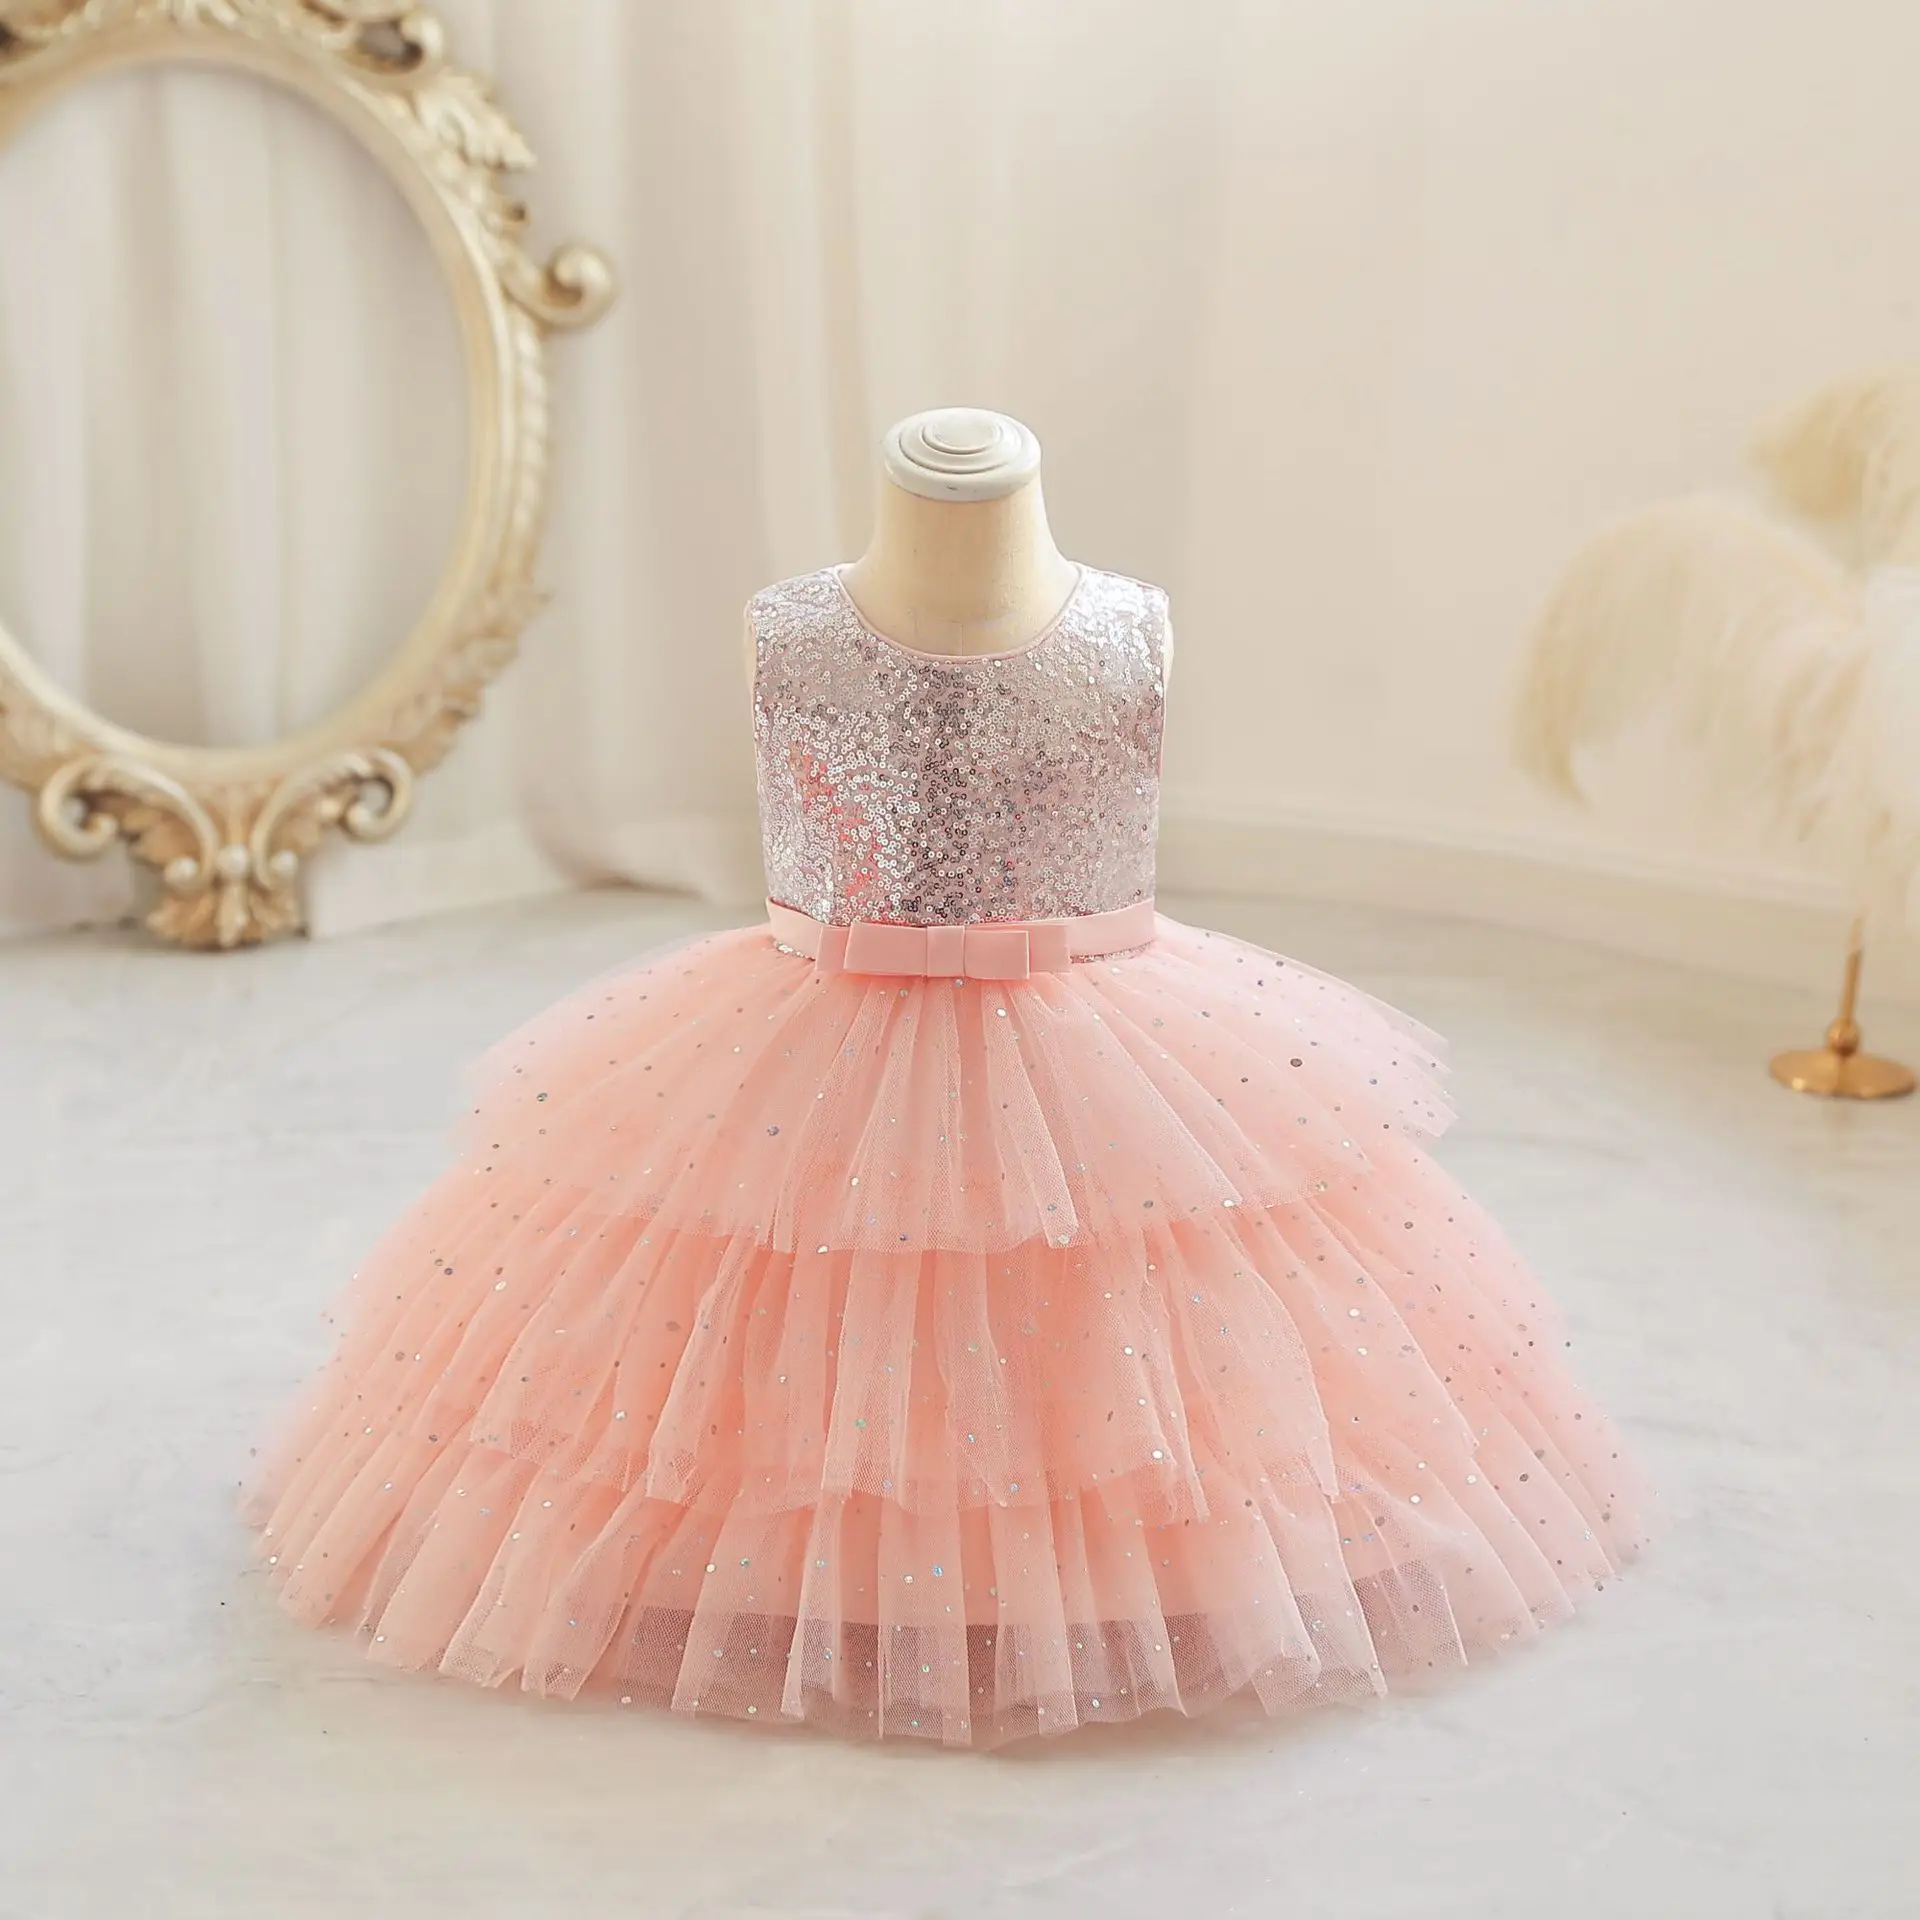 Girls Dress Silver Sequins Princess Tulle Layered Toddler One-Piece For Kids Birthday Party ropa bebe niña 아기의 드레스 0 12 18 24M images - 6